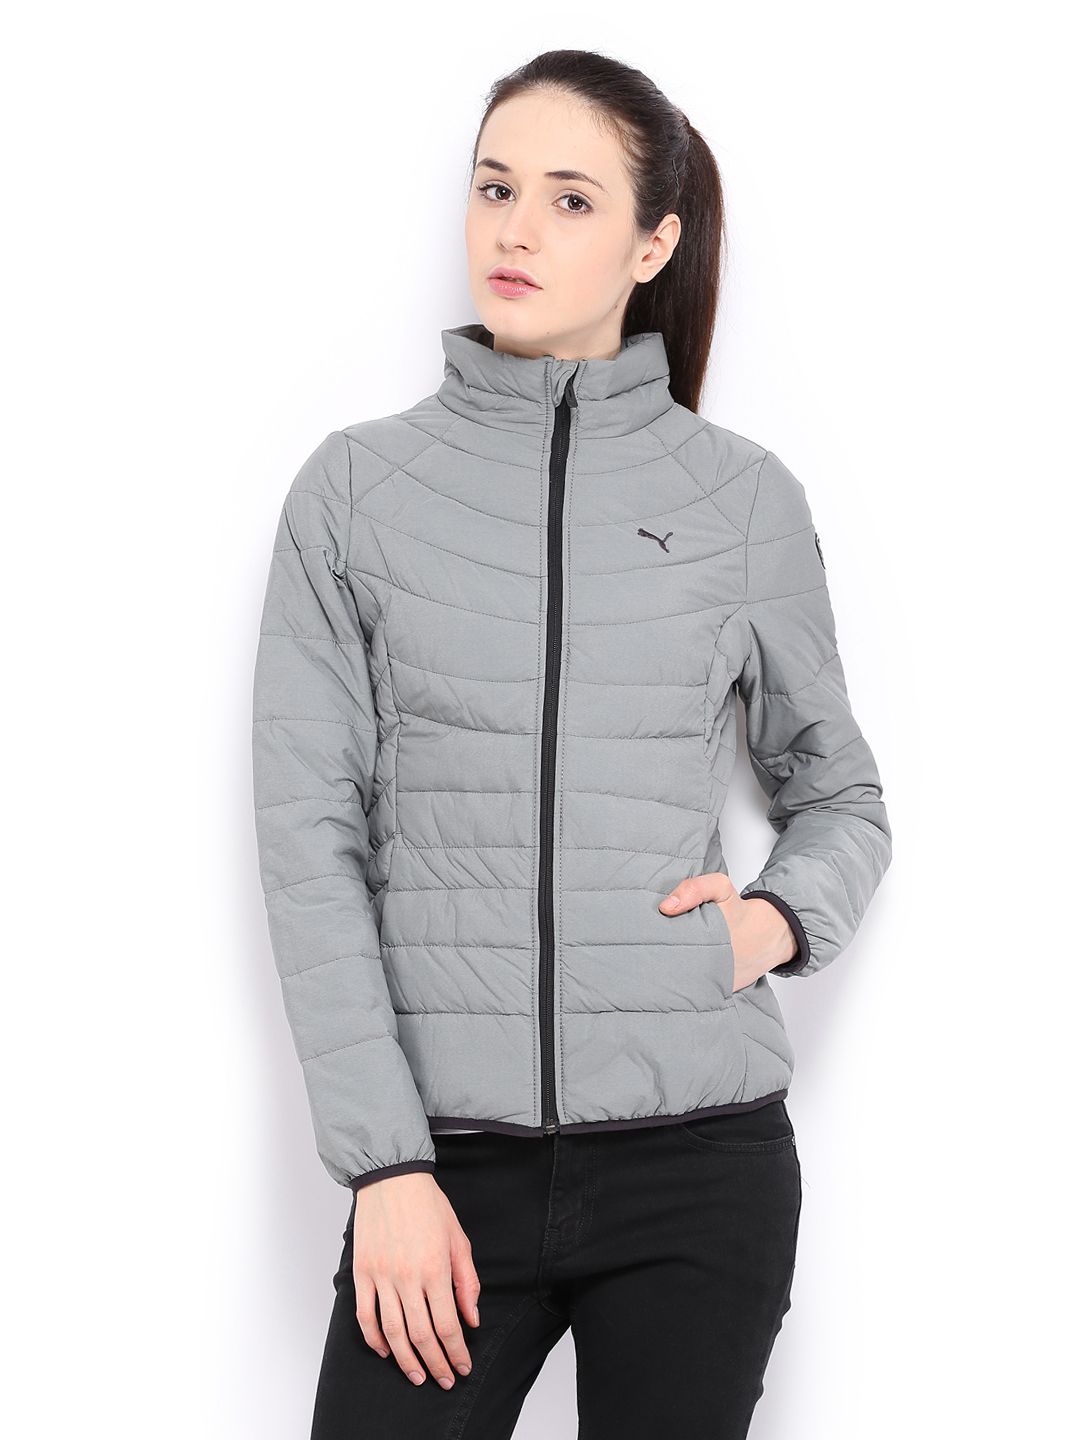 puma jackets at low price